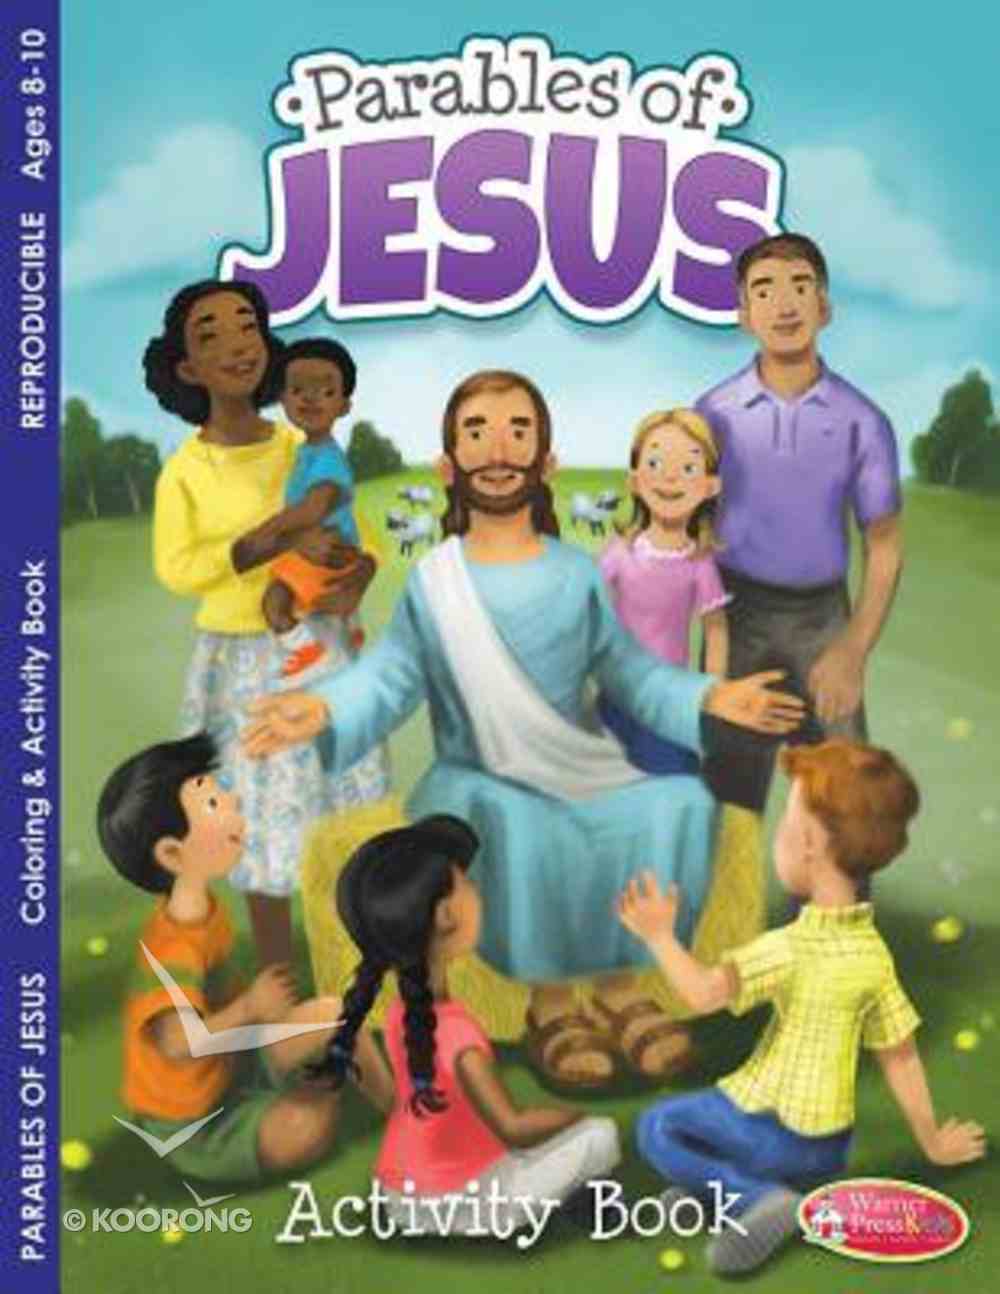 Parables of Jesus Coloring & Activity Book (Ages 8-10, Reproducible) (Warner Press Colouring & Activity Books Series) Paperback